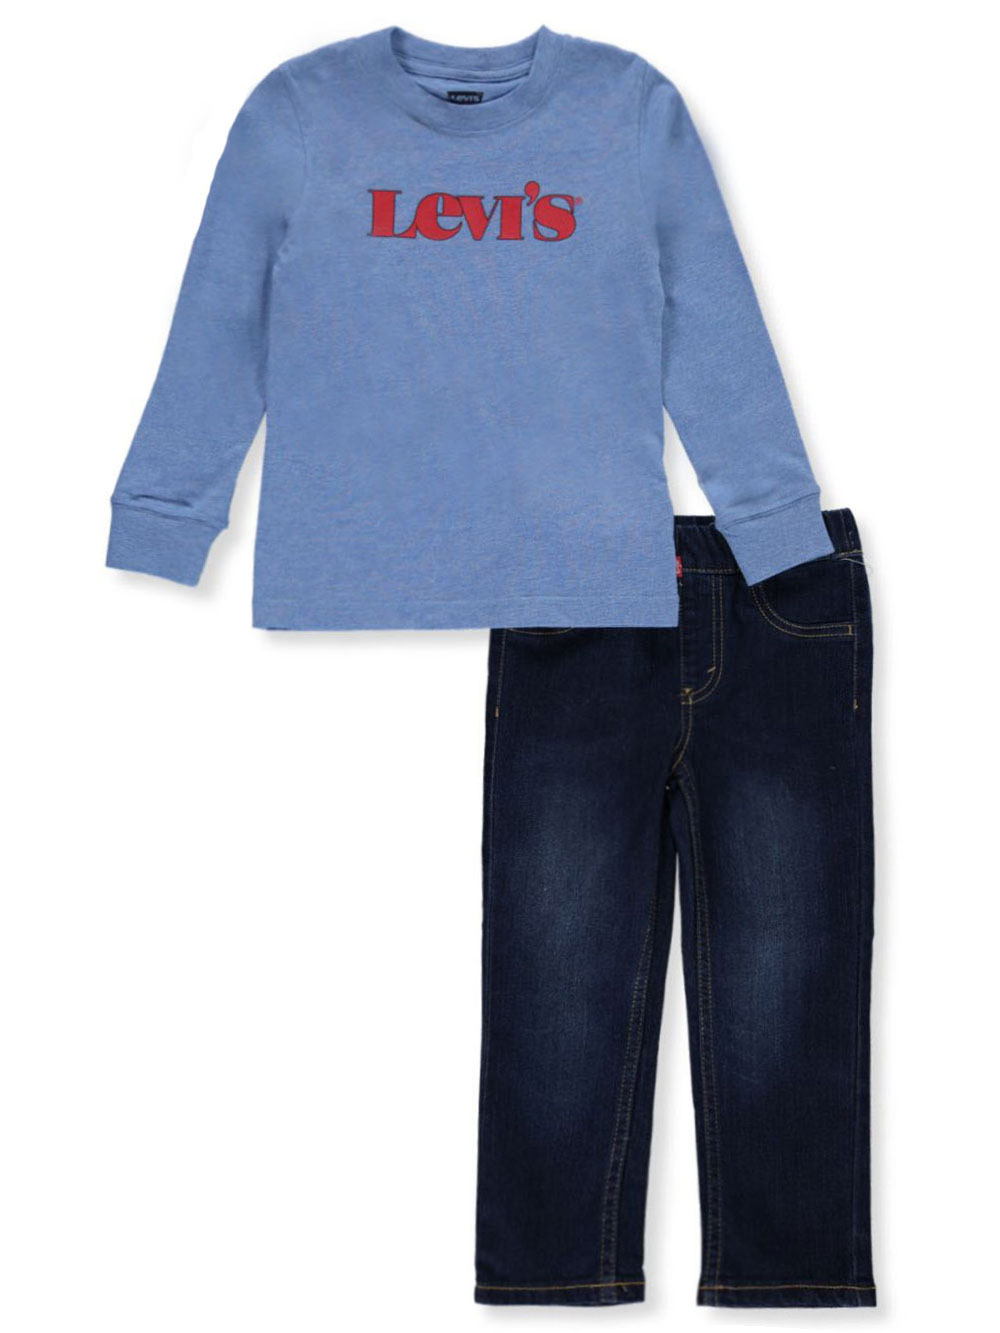 Boys Gray and Blue Sets